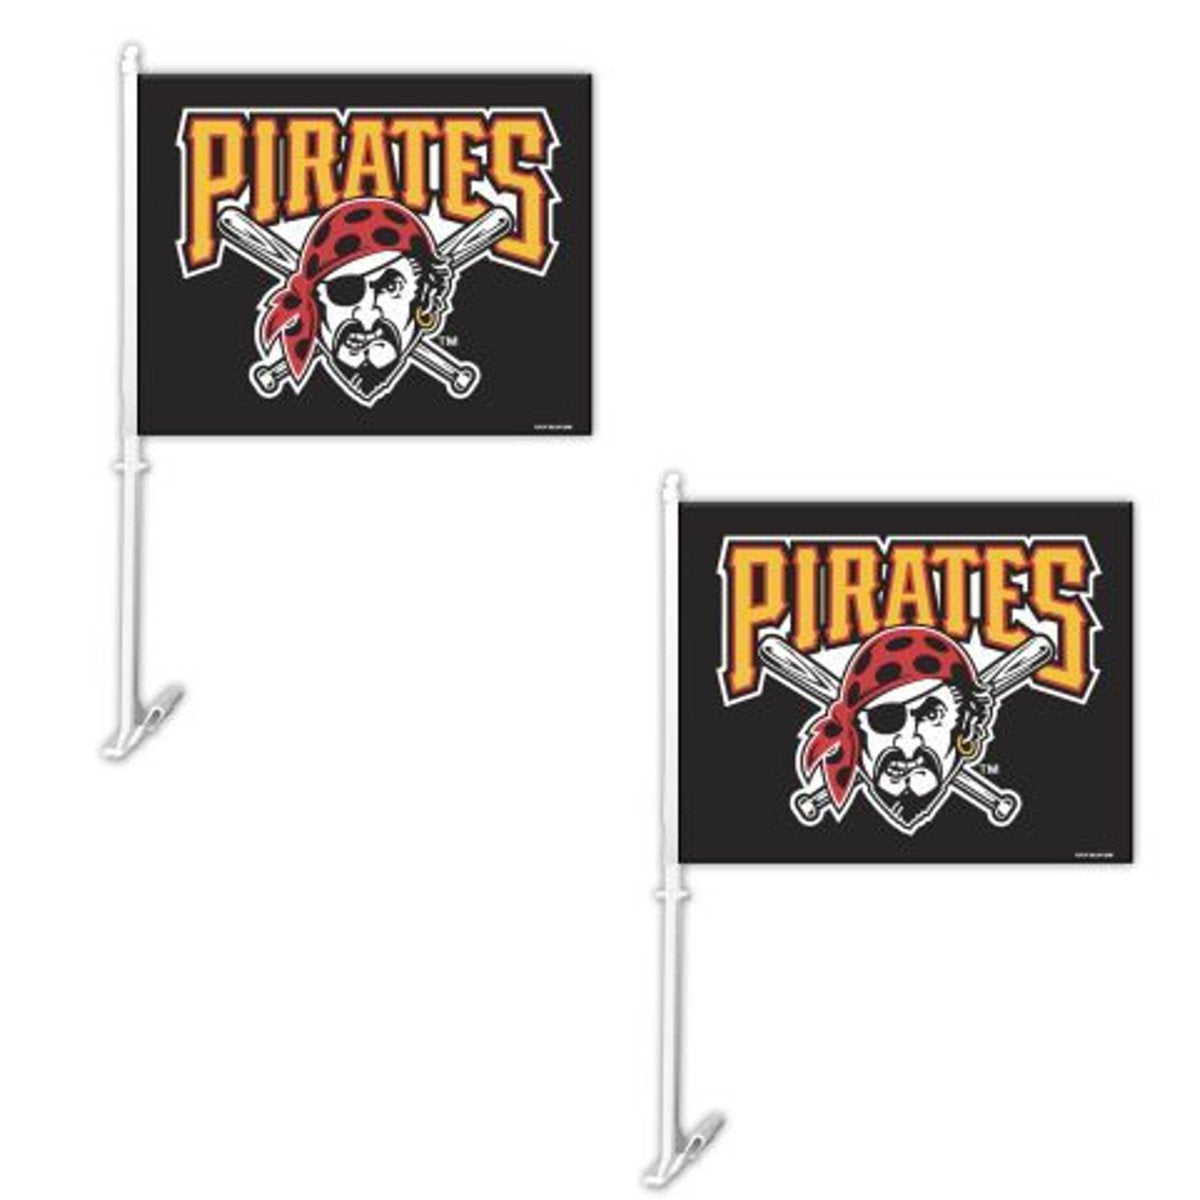 Fremont Die Official Major League Baseball Fan Shop Authentic MLB 2-Pack Car Window Flags. Show Team Pride with These 11.5" x 14.5" Window Flags. 